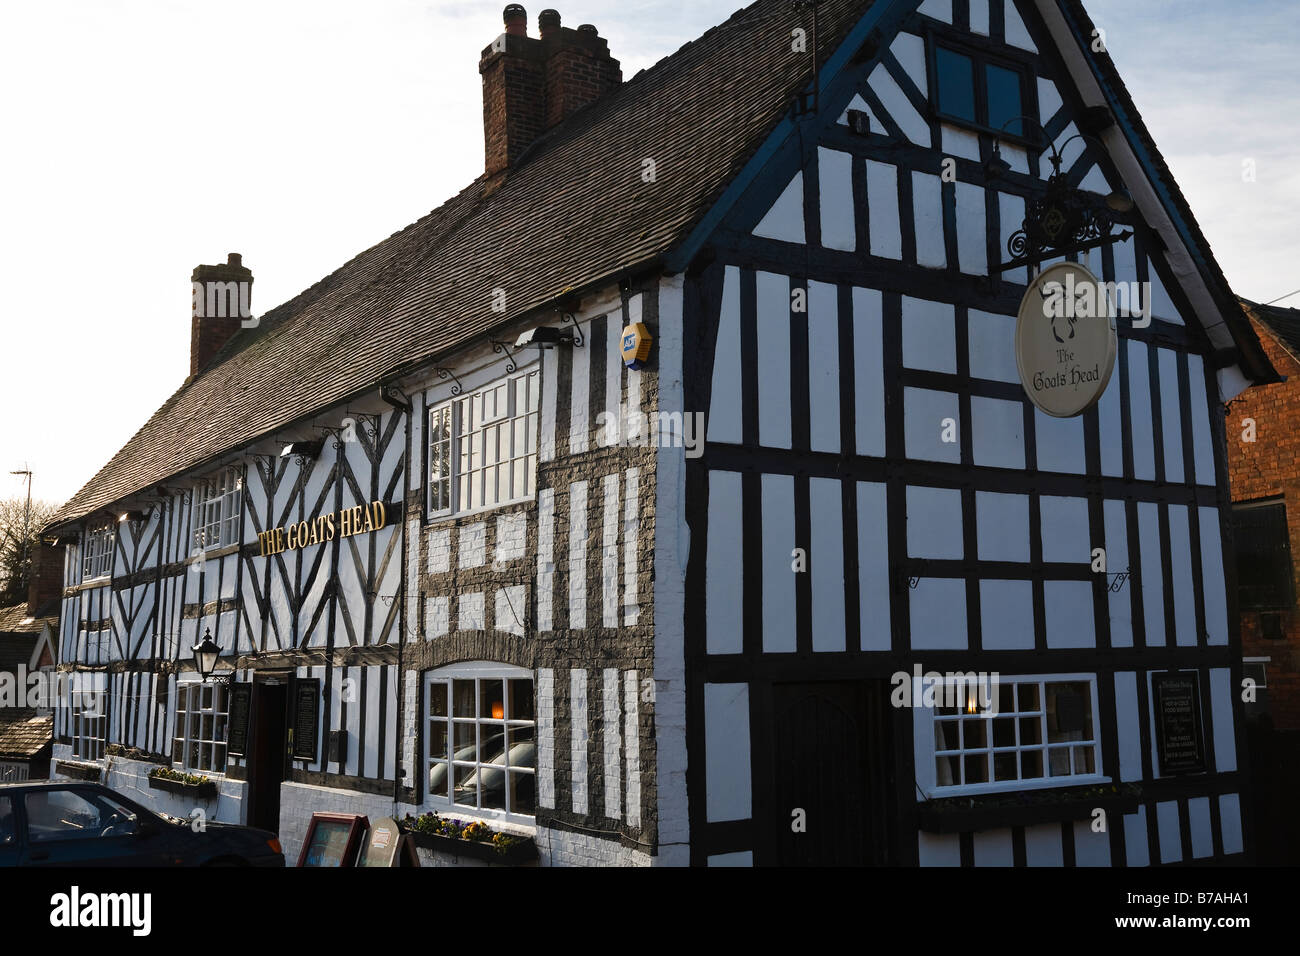 The Goats Head Hotel, Abbots Bromley, Staffordshire, England, UK Stock Photo